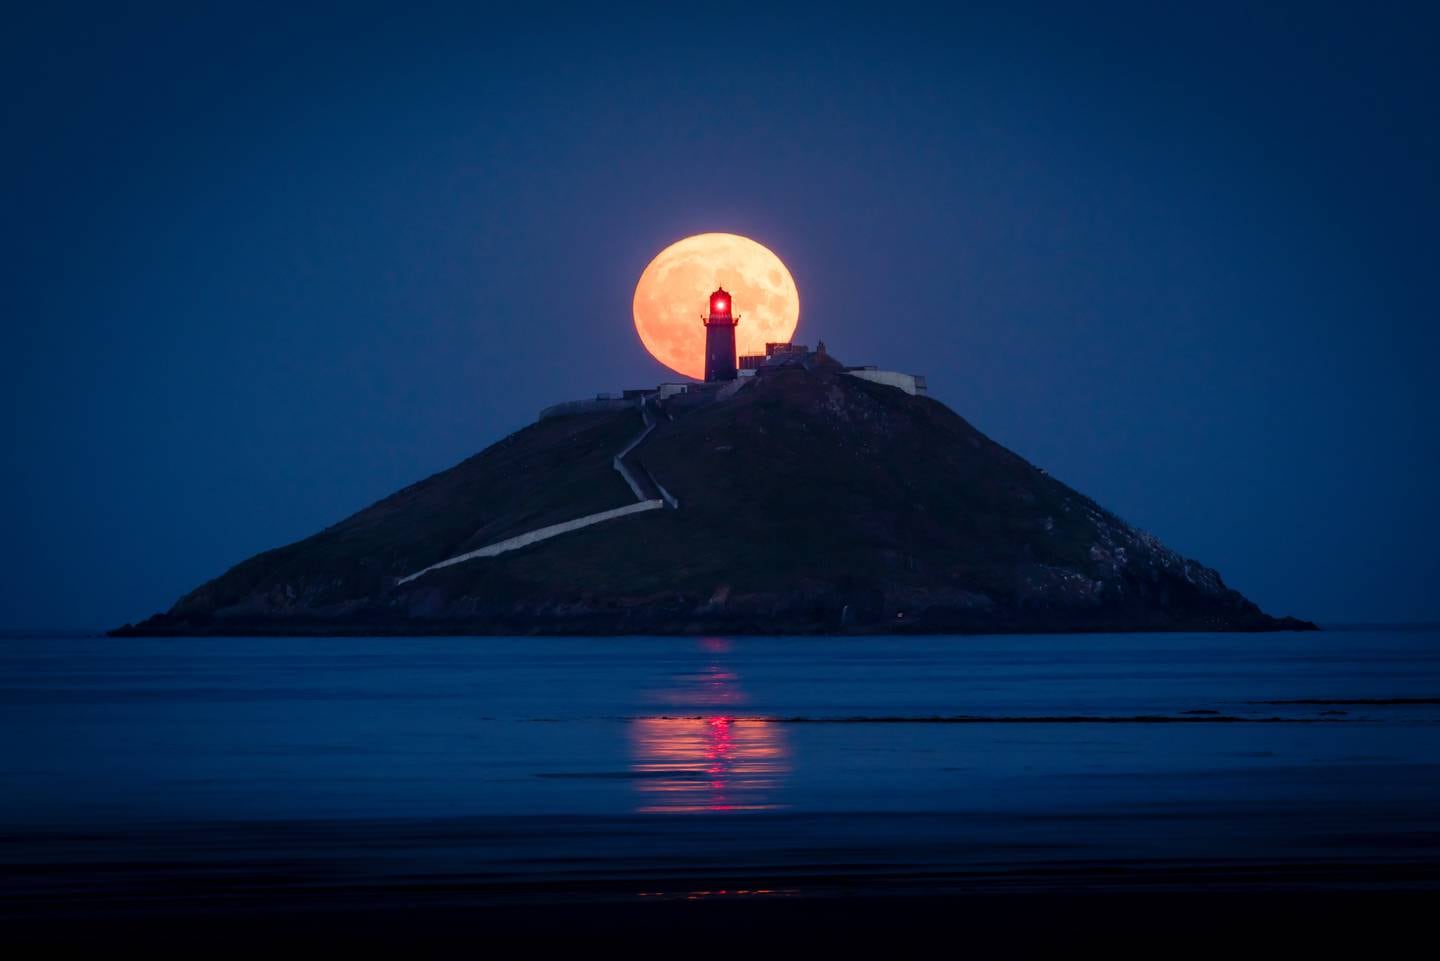 Coastal Heritage Category 
1st Place

Karol Ryan - Sturgeon Moon, Ballycotton - Ballycotton, Co. Cork

Karol Ryan stated of this winning image, “I had been to this location the previous month to try and capture this image but the weather didn't work in my favour, but the next month on 11th August the conditions were perfect & I managed to get the shot I was after.”